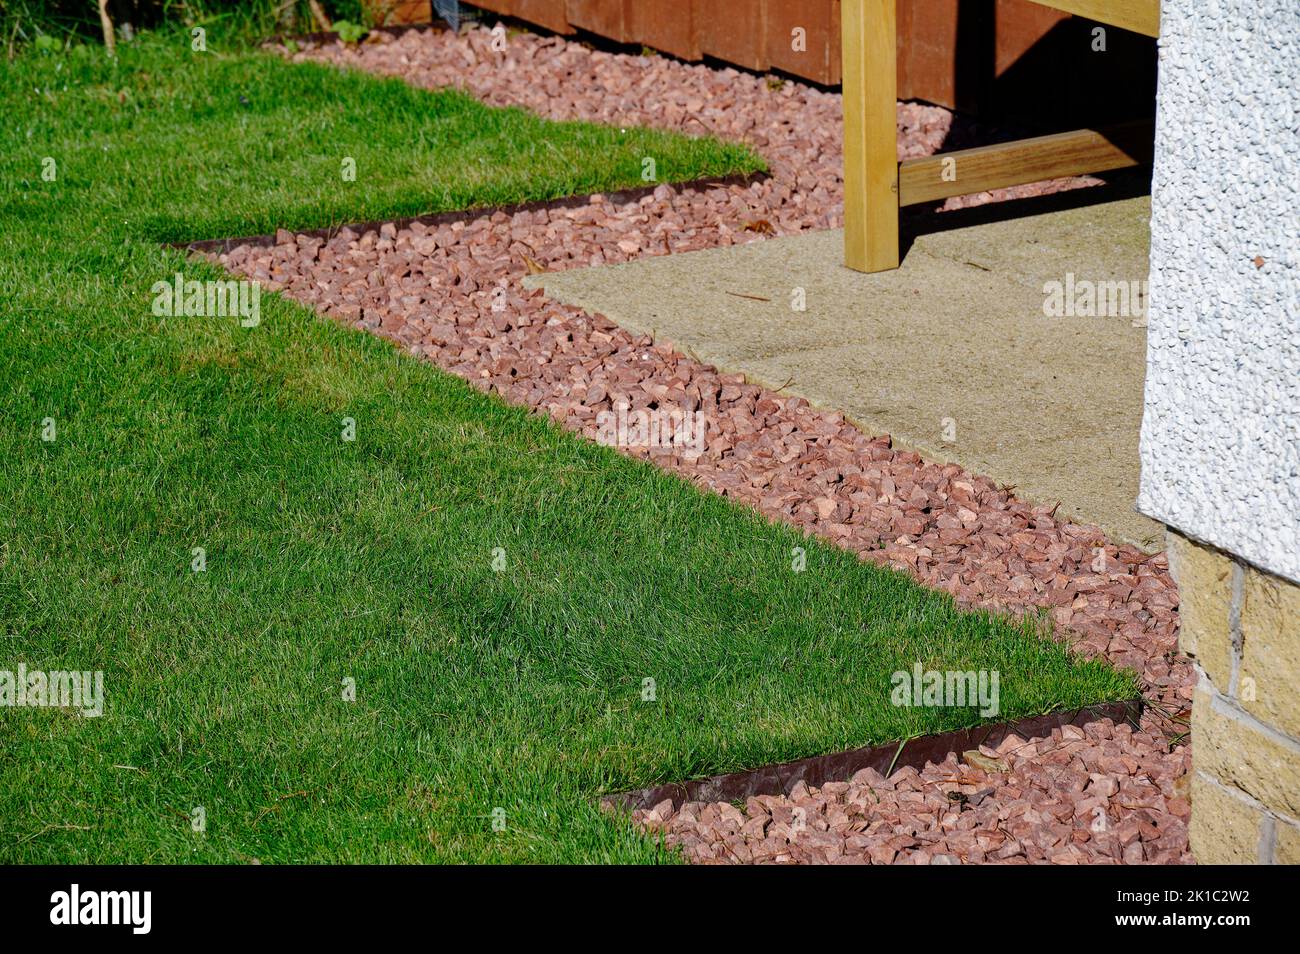 Lawn edging made of metal showing straight and neat finish Stock Photo